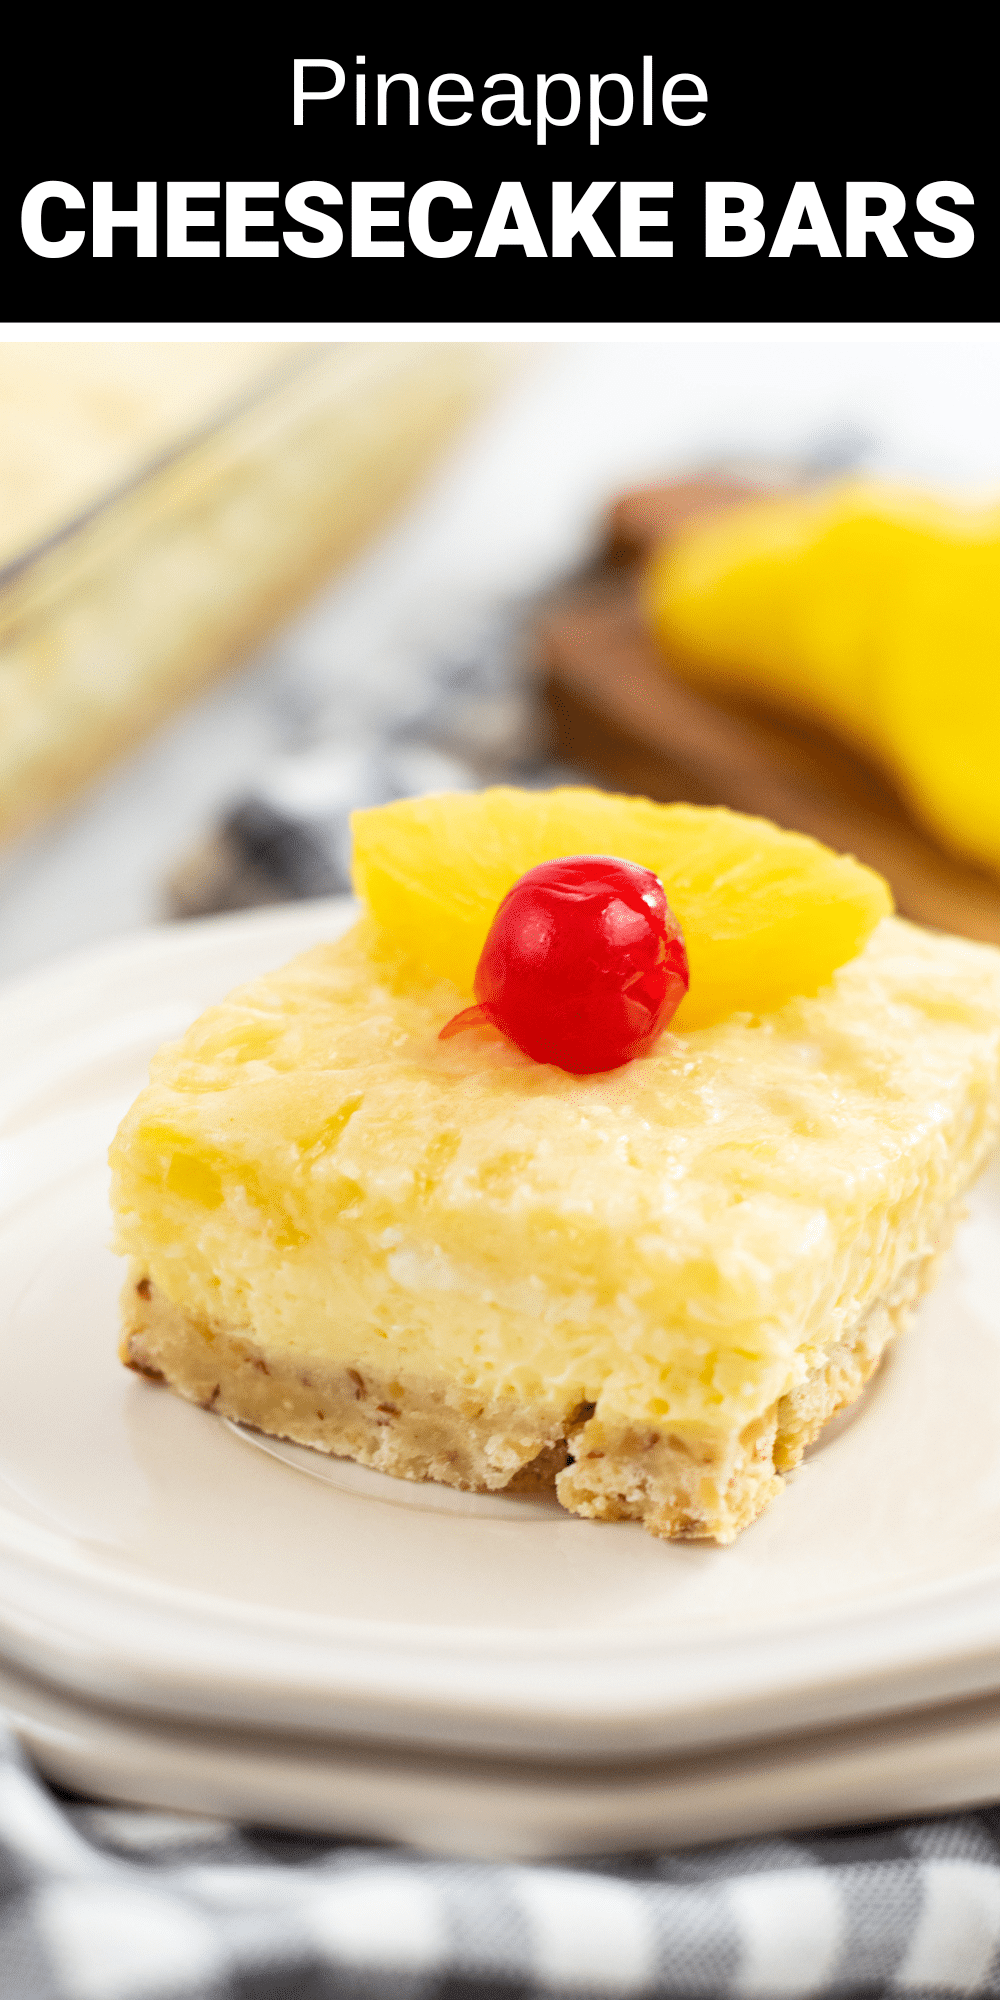 These pineapple cheesecake bars are an incredibly delicious dessert that’s perfect for a party or special occasion. With a buttery shortbread crust, a rich pineapple cream cheese filling, and a light and fluffy pineapple topping, this irresistible treat is a sure crowd-pleaser.